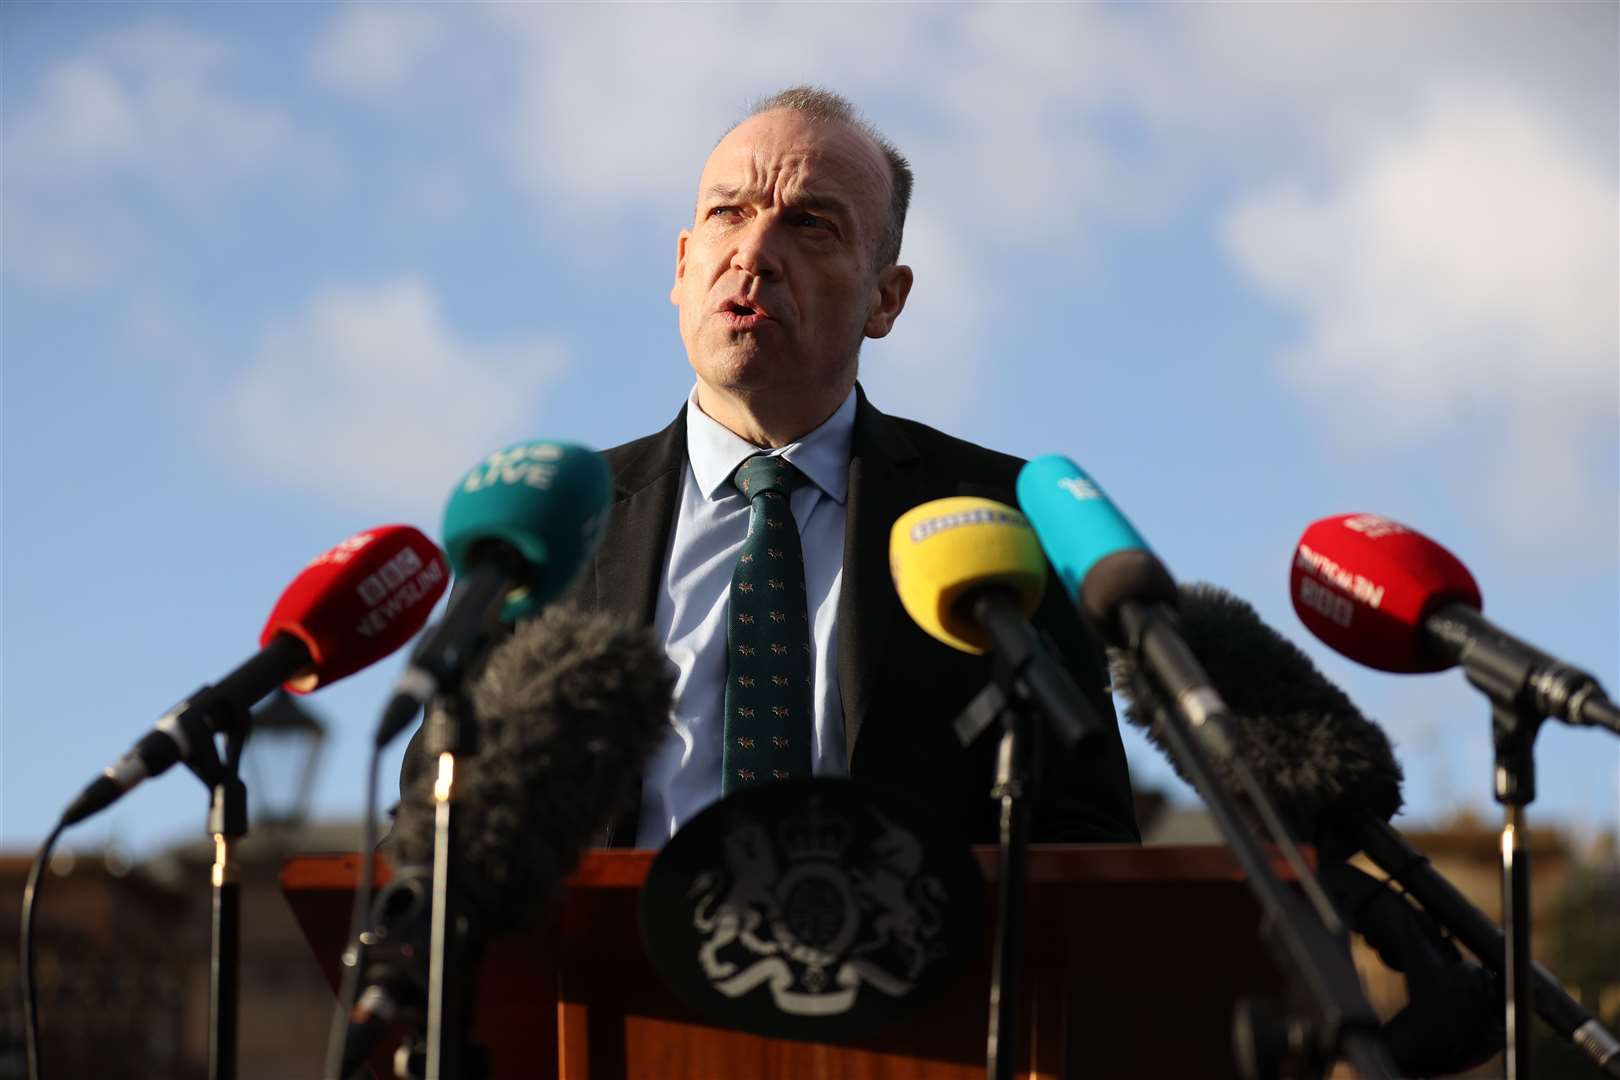 Northern Ireland Secretary Chris Heaton-Harris. Under the terms of the Good Friday Agreement, the Secretary of State has responsibility for calling a border poll (Liam McBurney/PA)